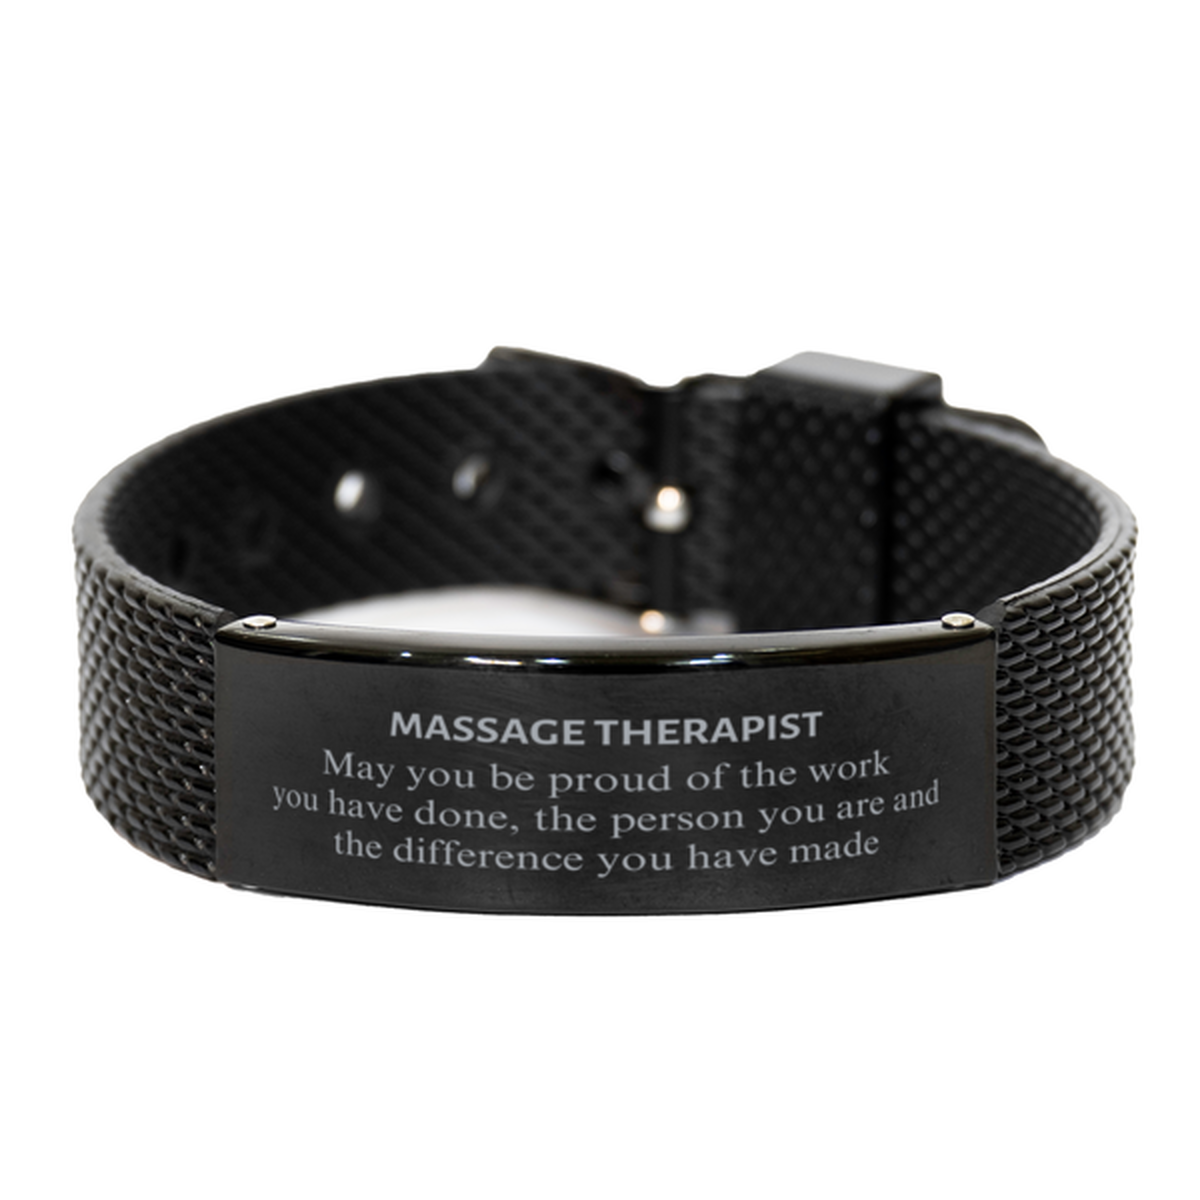 Massage Therapist May you be proud of the work you have done, Retirement Massage Therapist Black Shark Mesh Bracelet for Colleague Appreciation Gifts Amazing for Massage Therapist